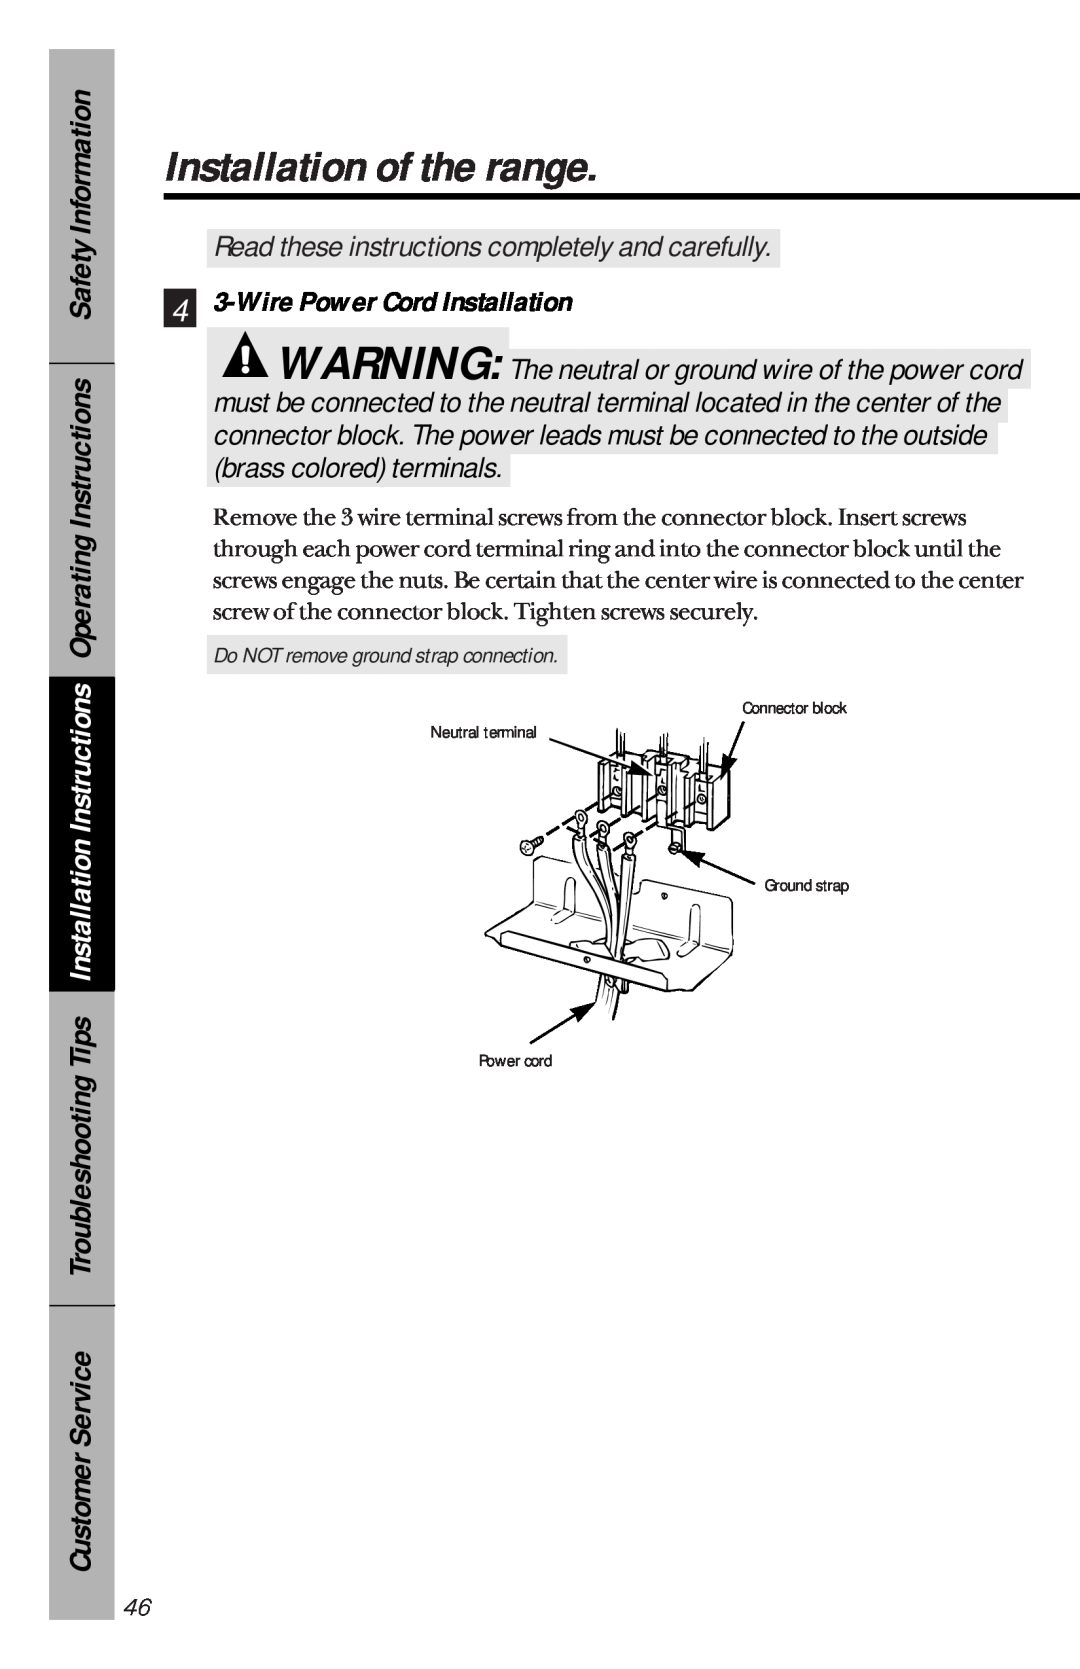 GE 49-8827 4 3-WirePower Cord Installation, Installation of the range, Read these instructions completely and carefully 